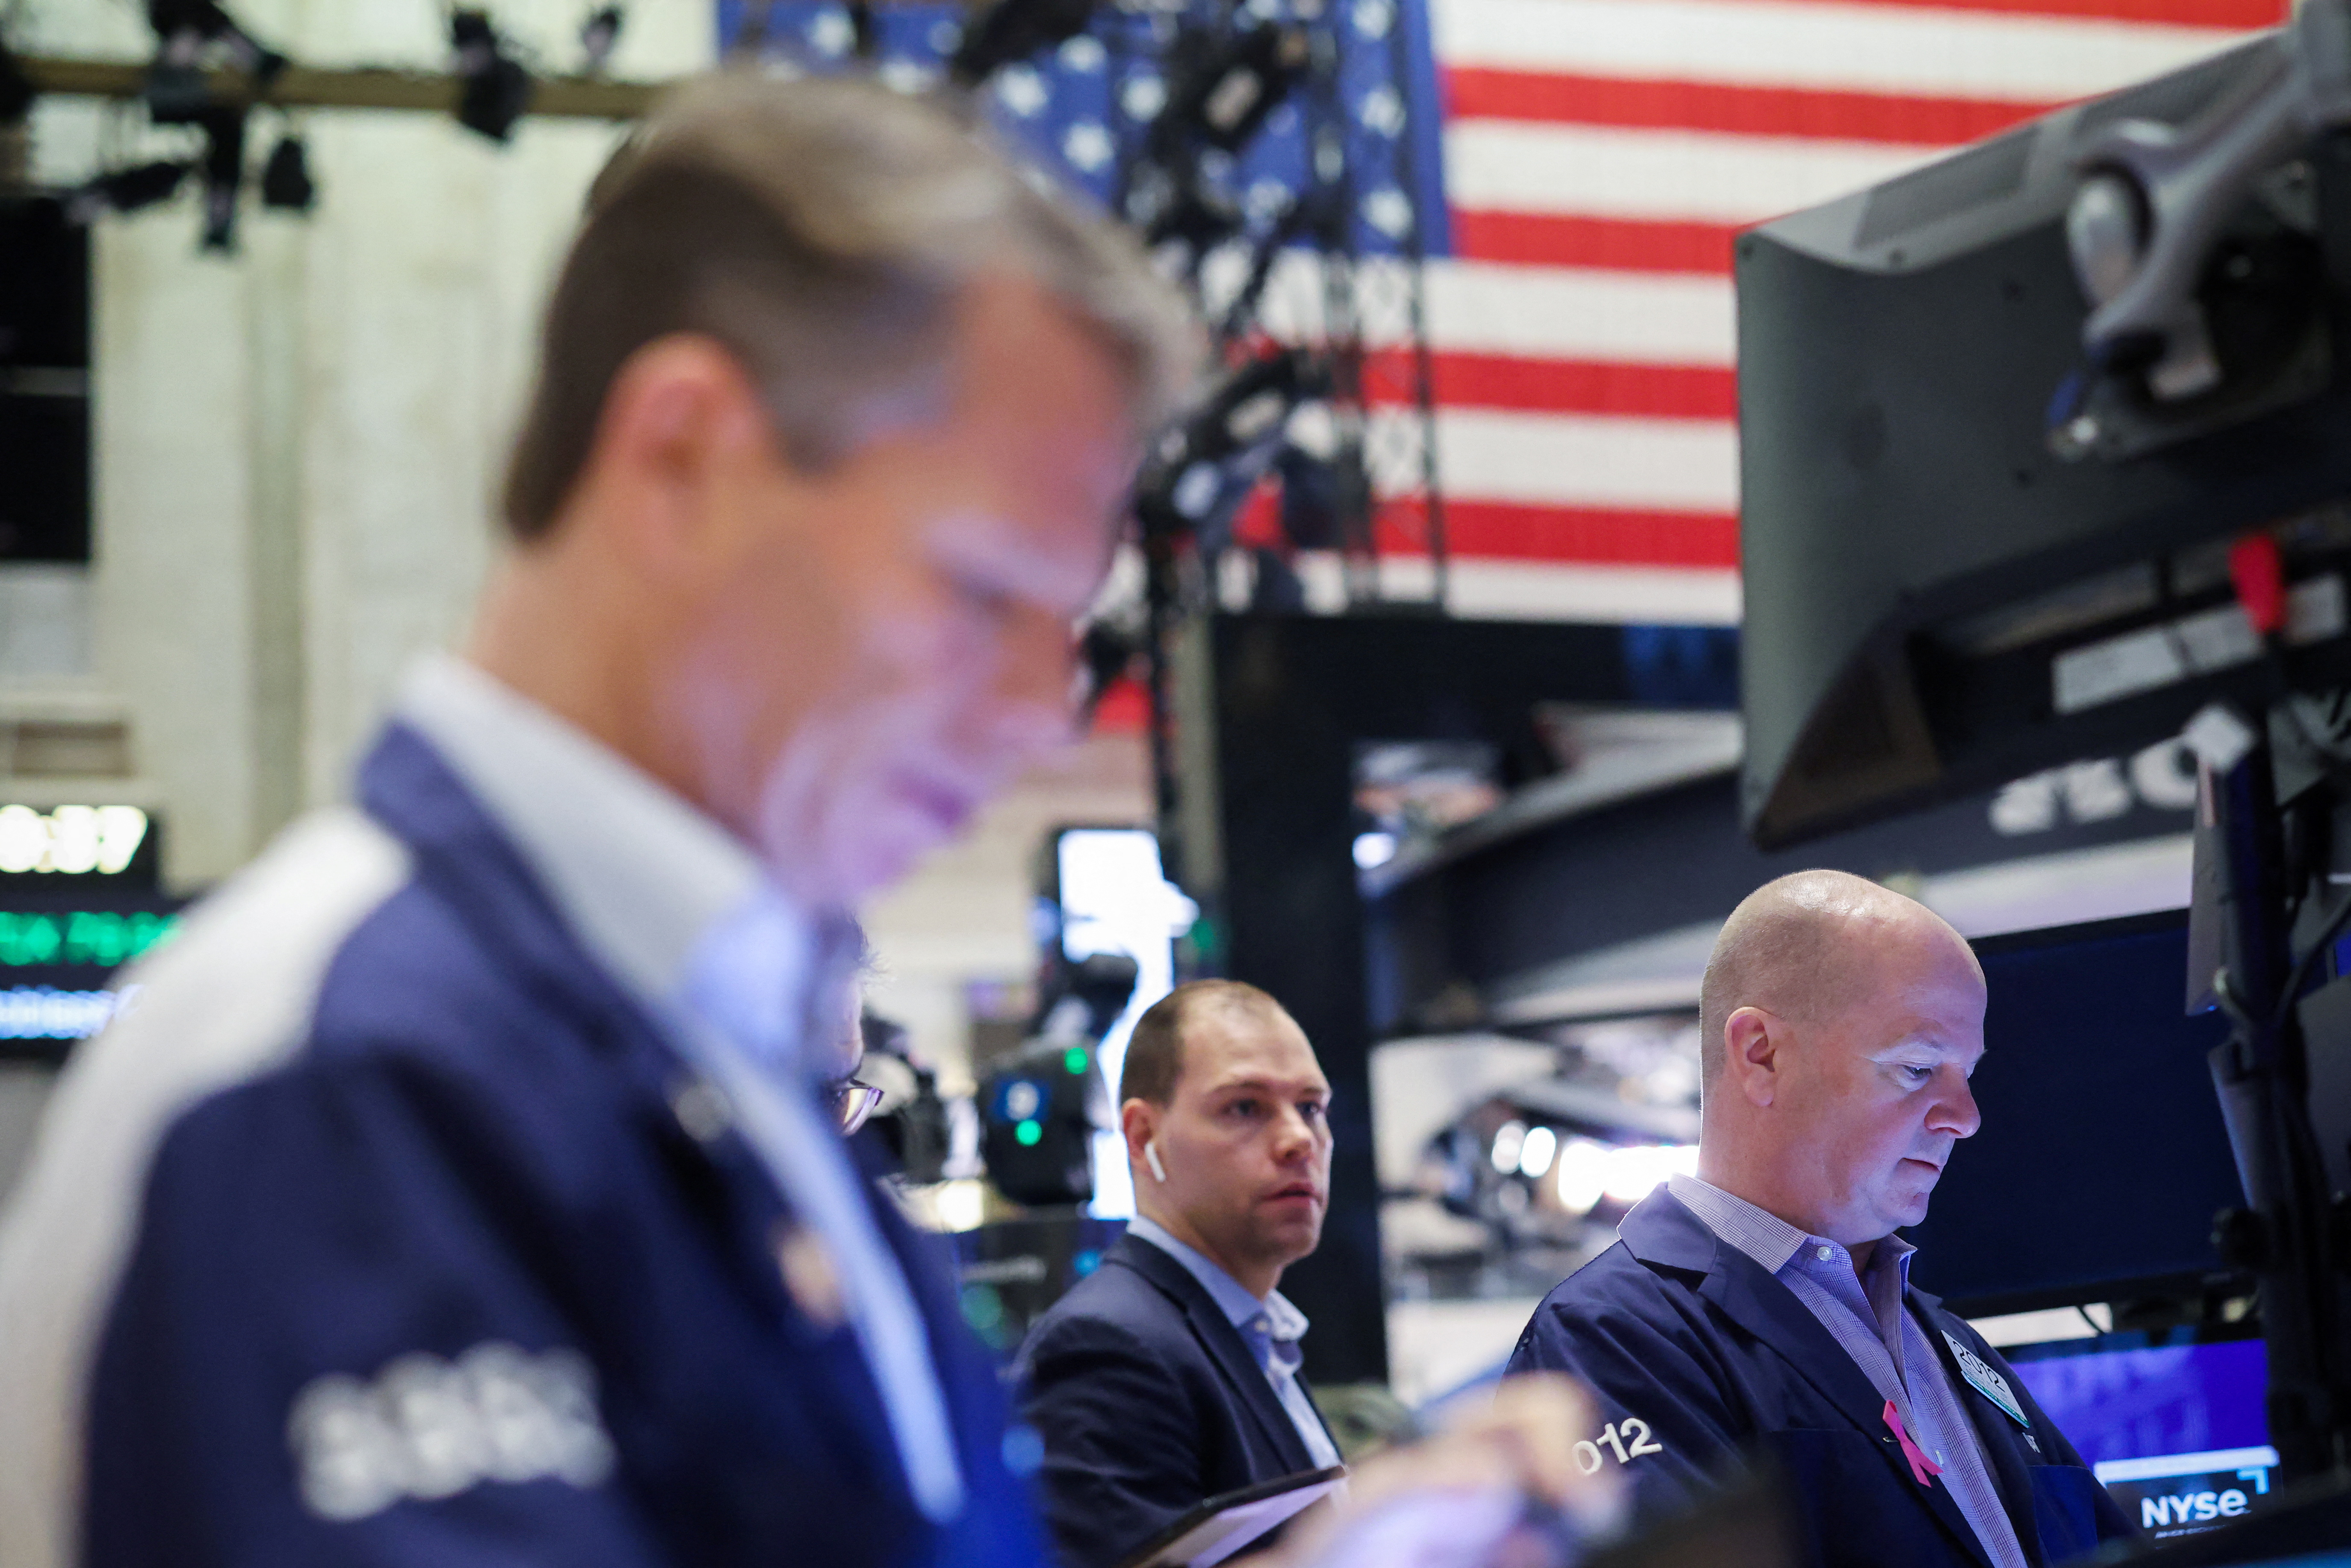 Stock market news live updates: Stocks end first week of 2023 higher after jobs report spurs big rally